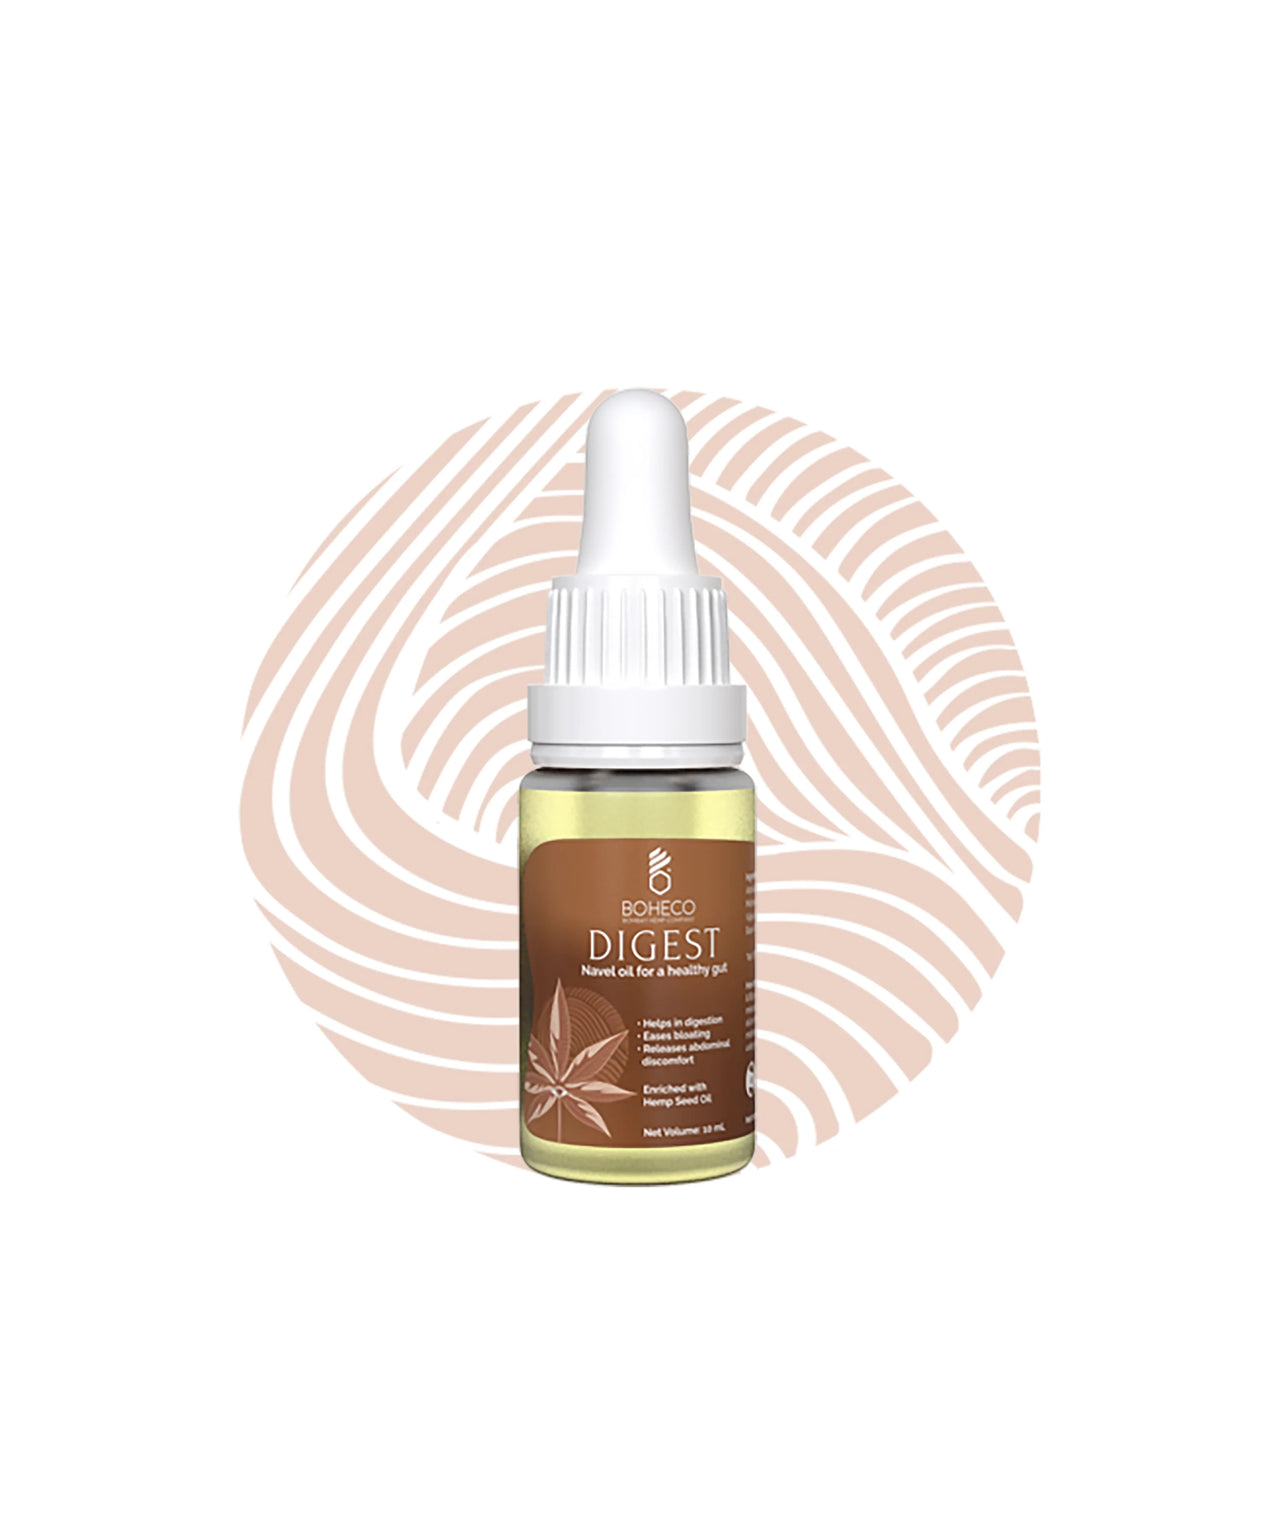 Boheco Digest Navel Oil for Healthy Gut - 10 ml